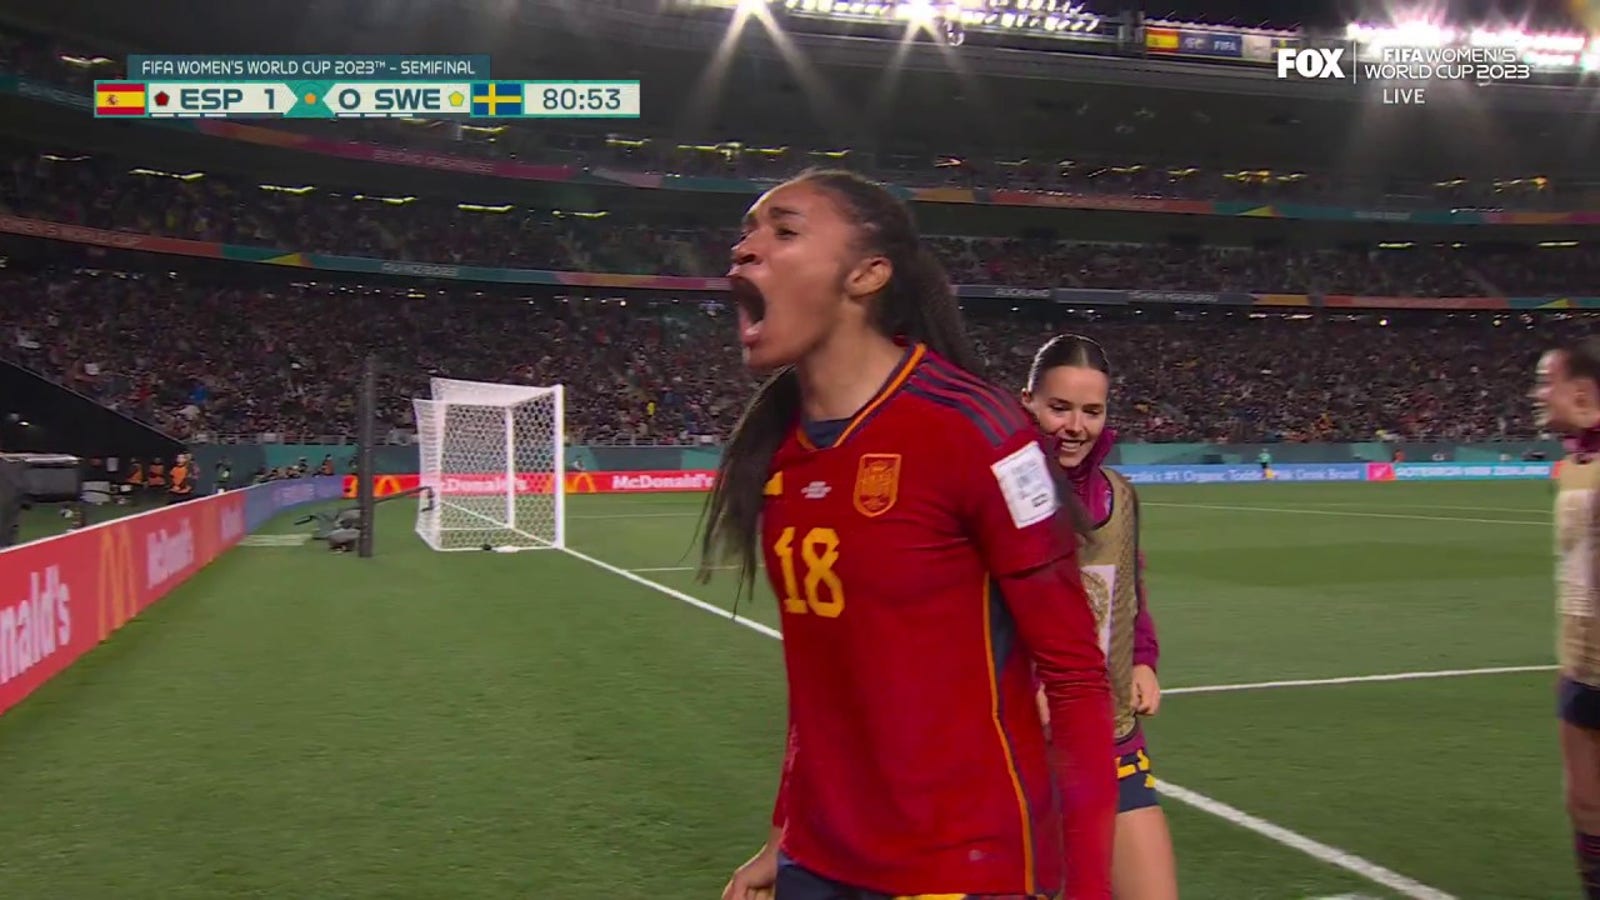 Spain's Salma Paralluelo opens the scoring in 81st minute